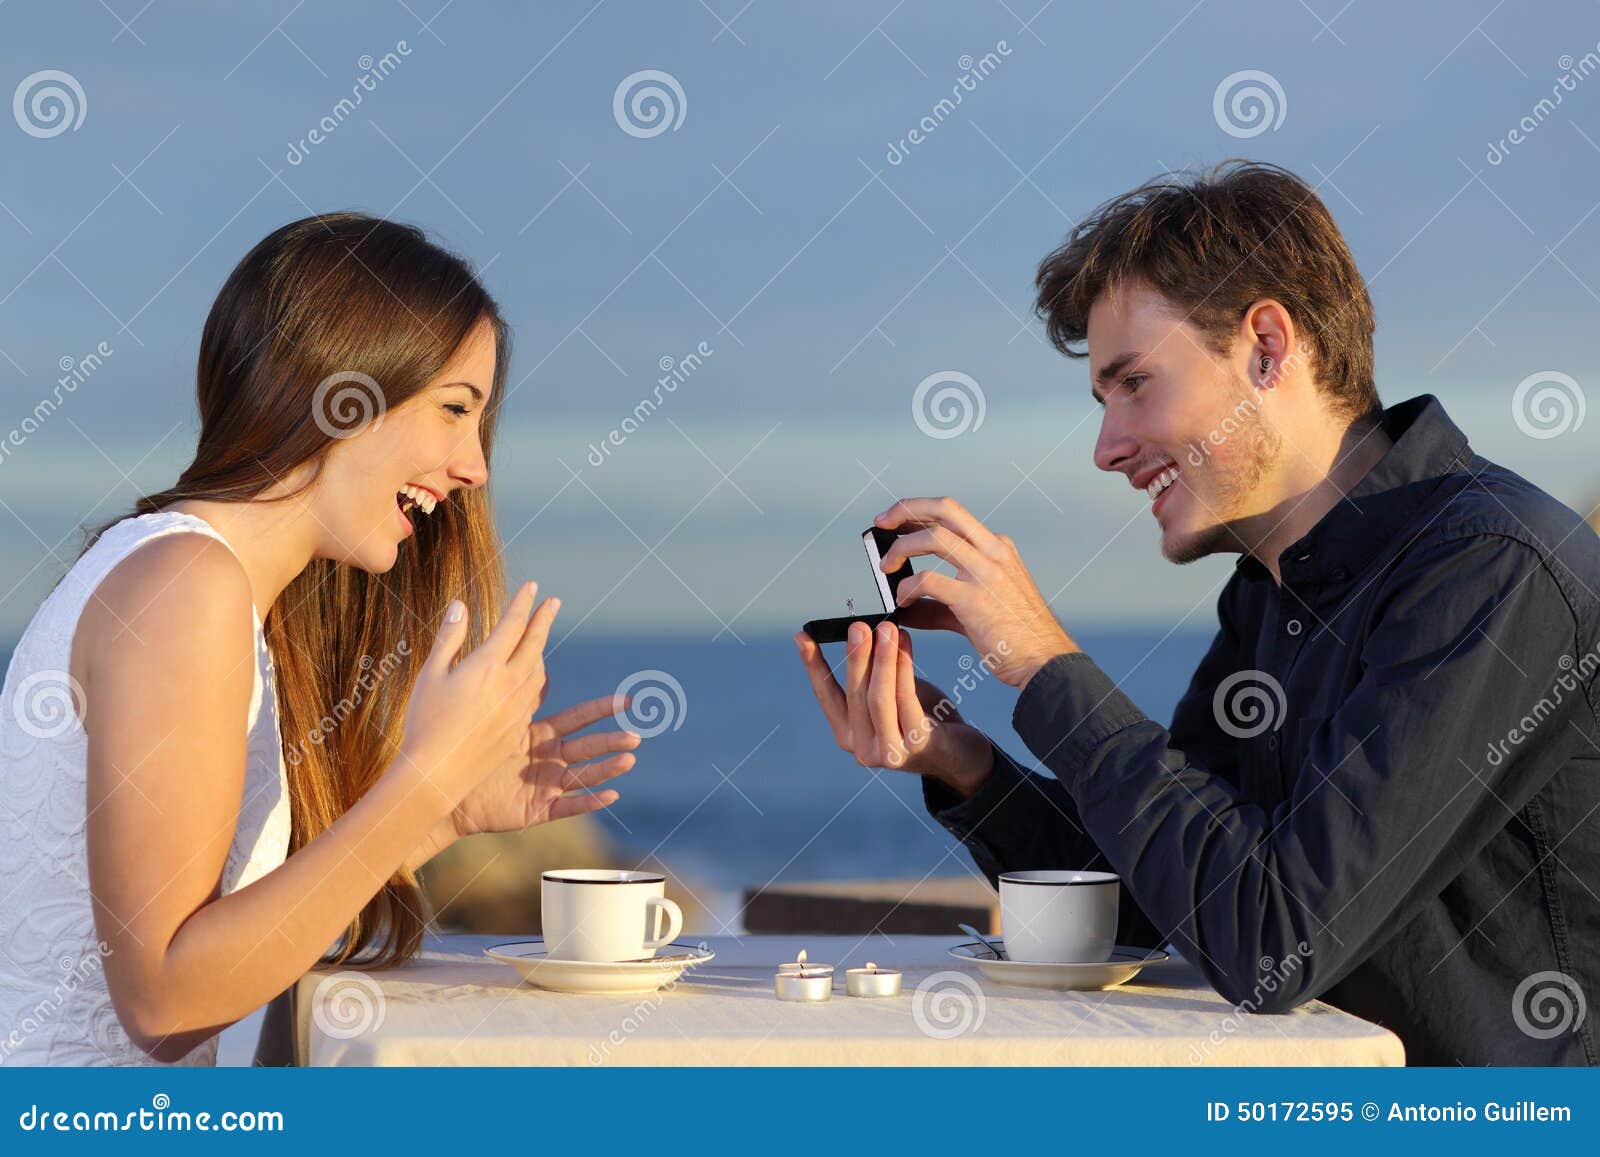 boyfriend requesting hand of his girlfriend with a engagement ring